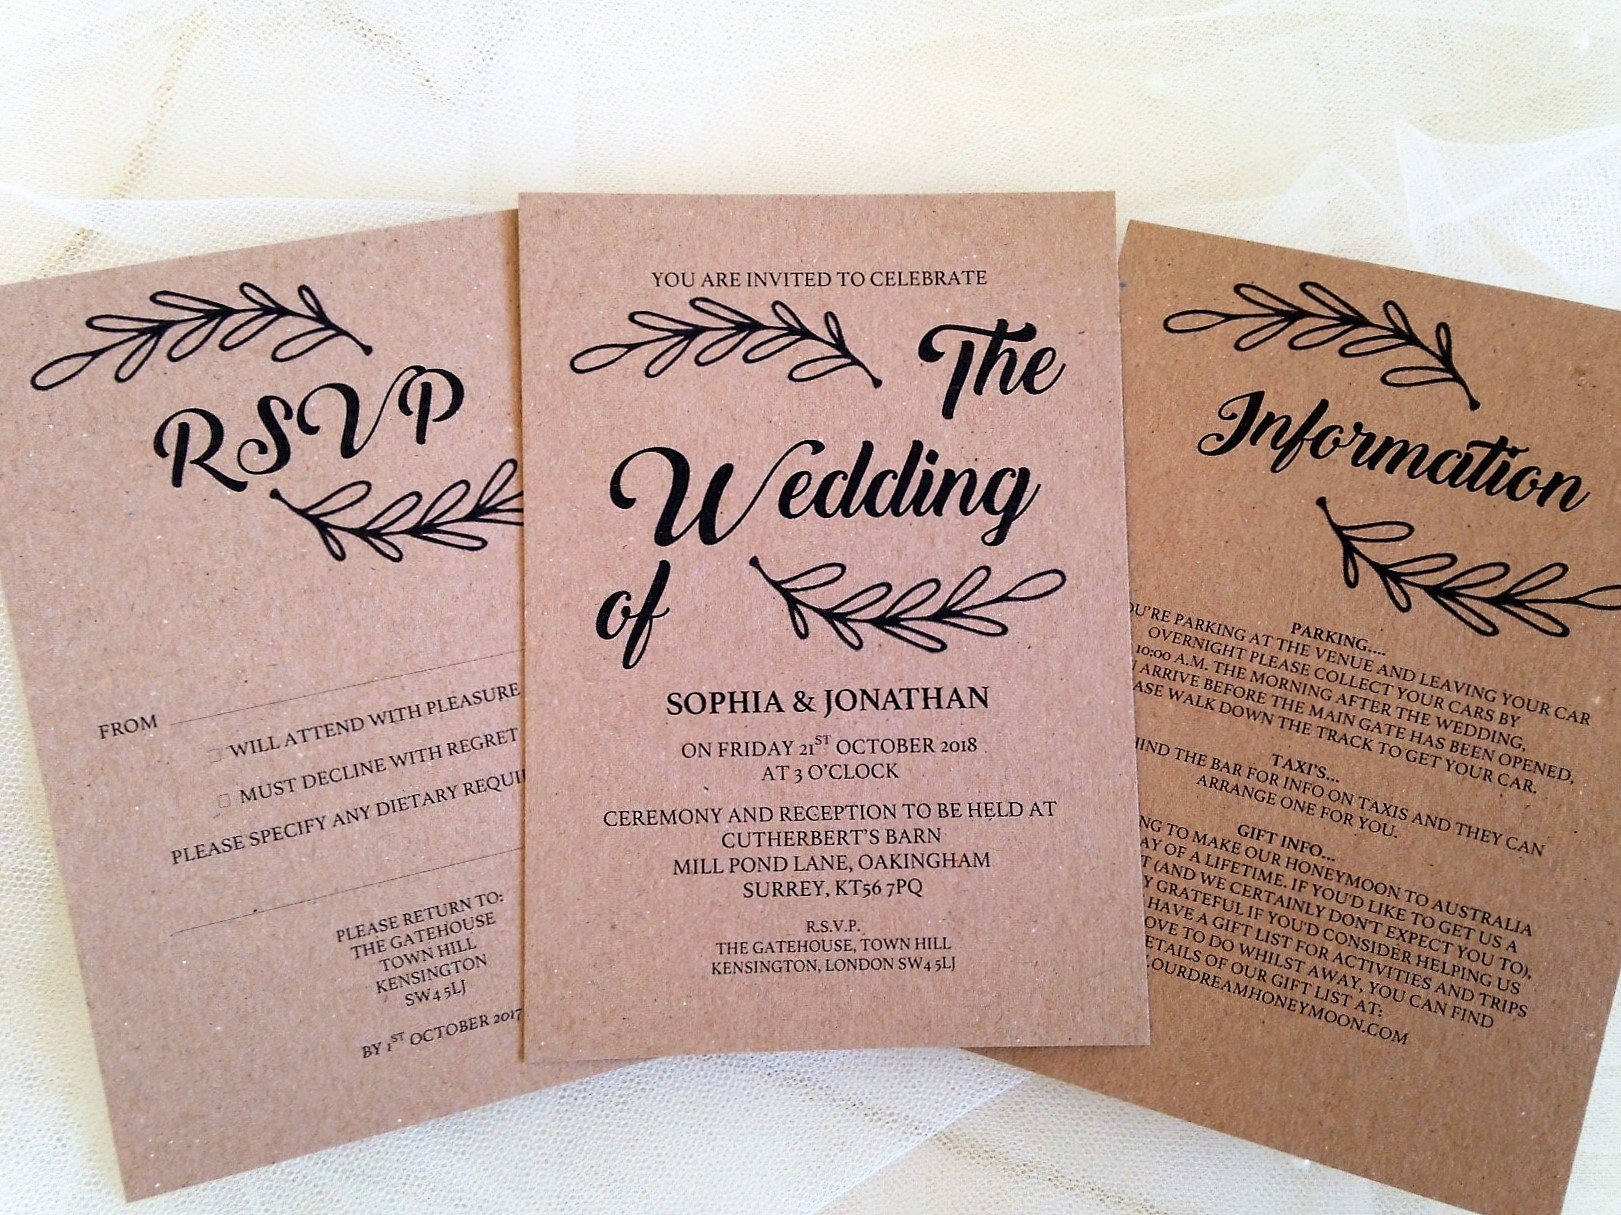 Make your own wedding invitations, is there any need at these prices?